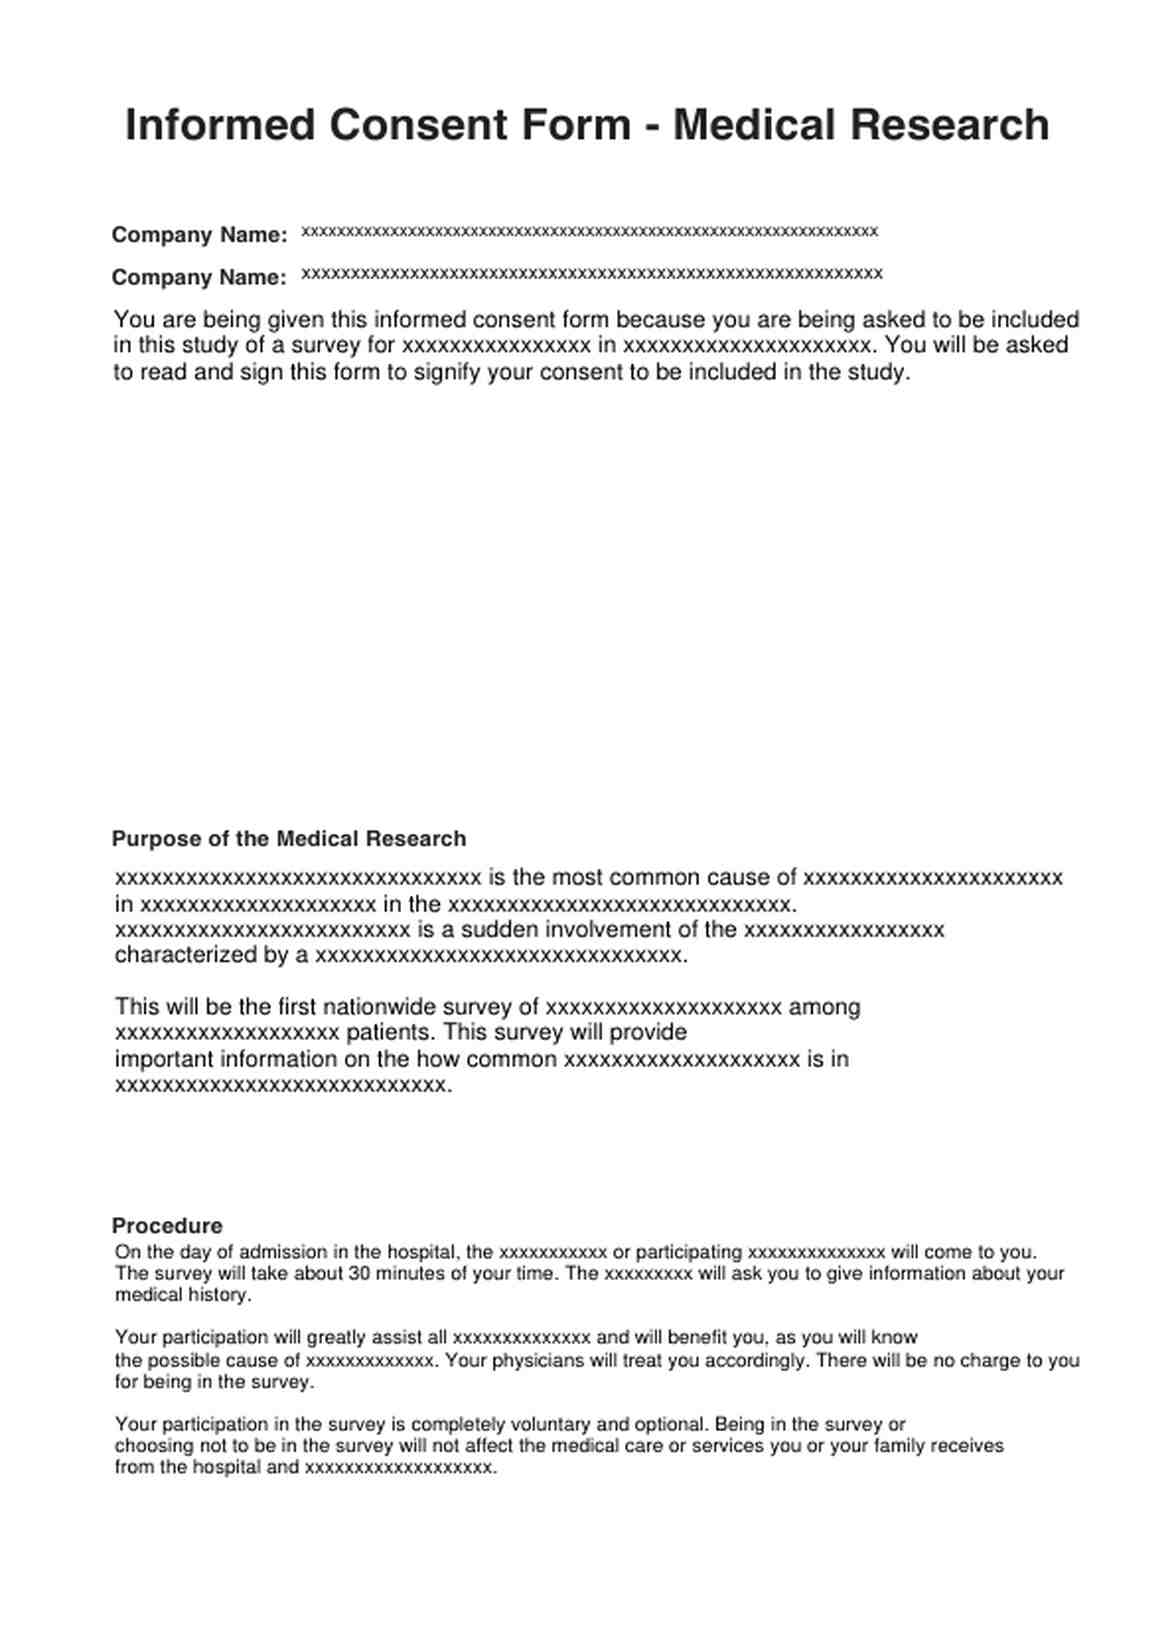 Informed Consent Form - Medical Research PDF Example